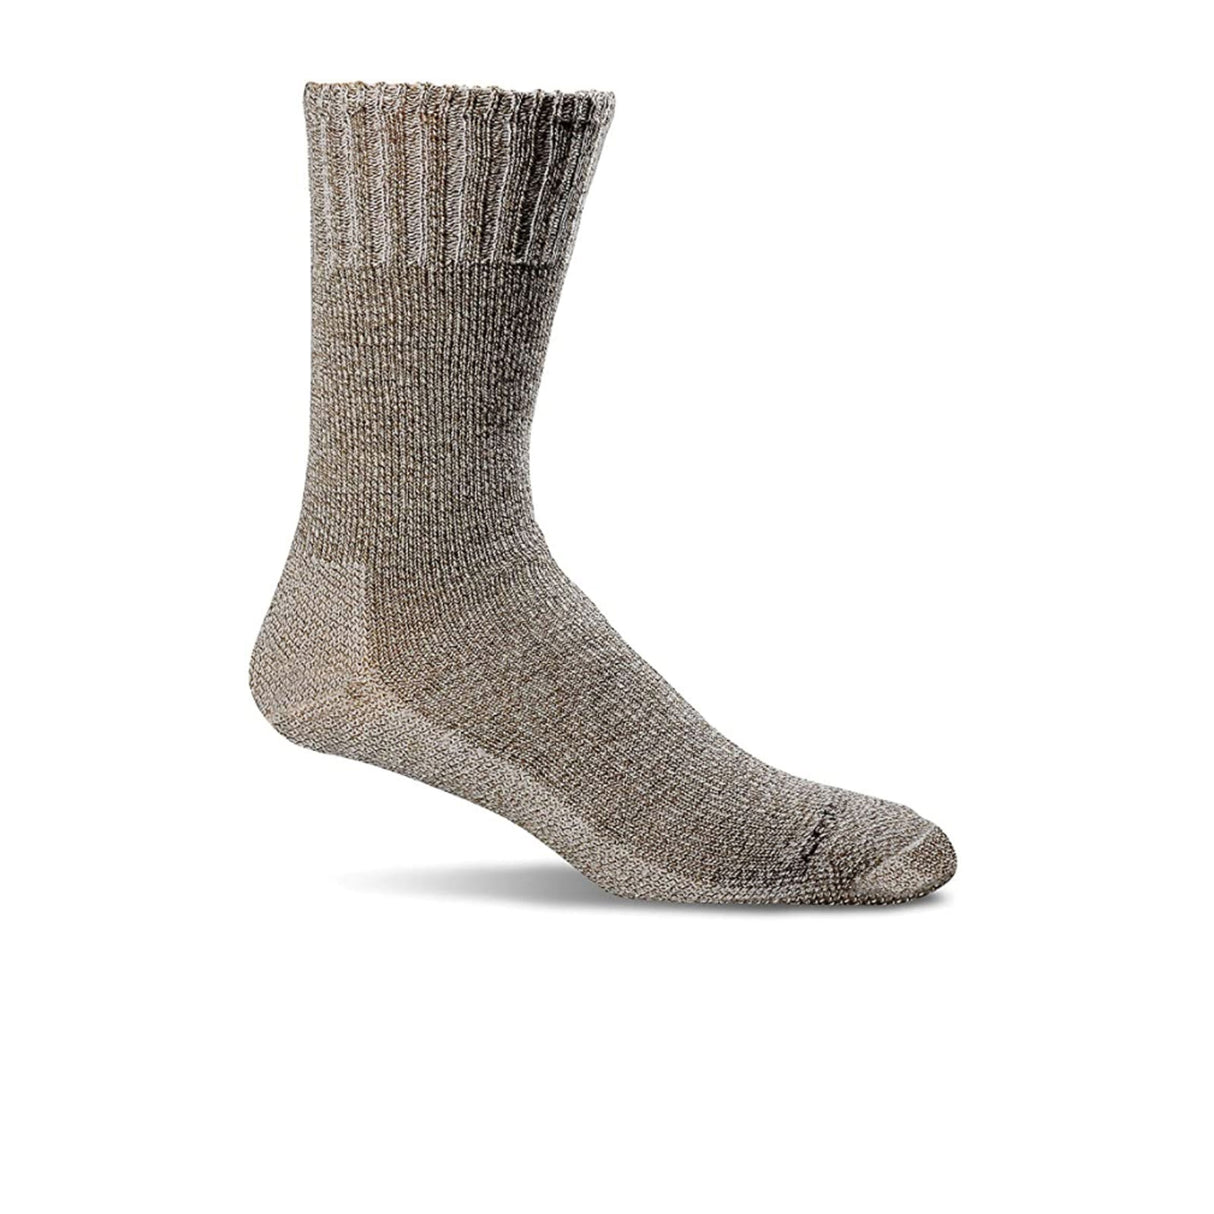 Sockwell Big Easy Relaxed Fit Crew Sock (Women) - Bark Accessories - Socks - Lifestyle - The Heel Shoe Fitters